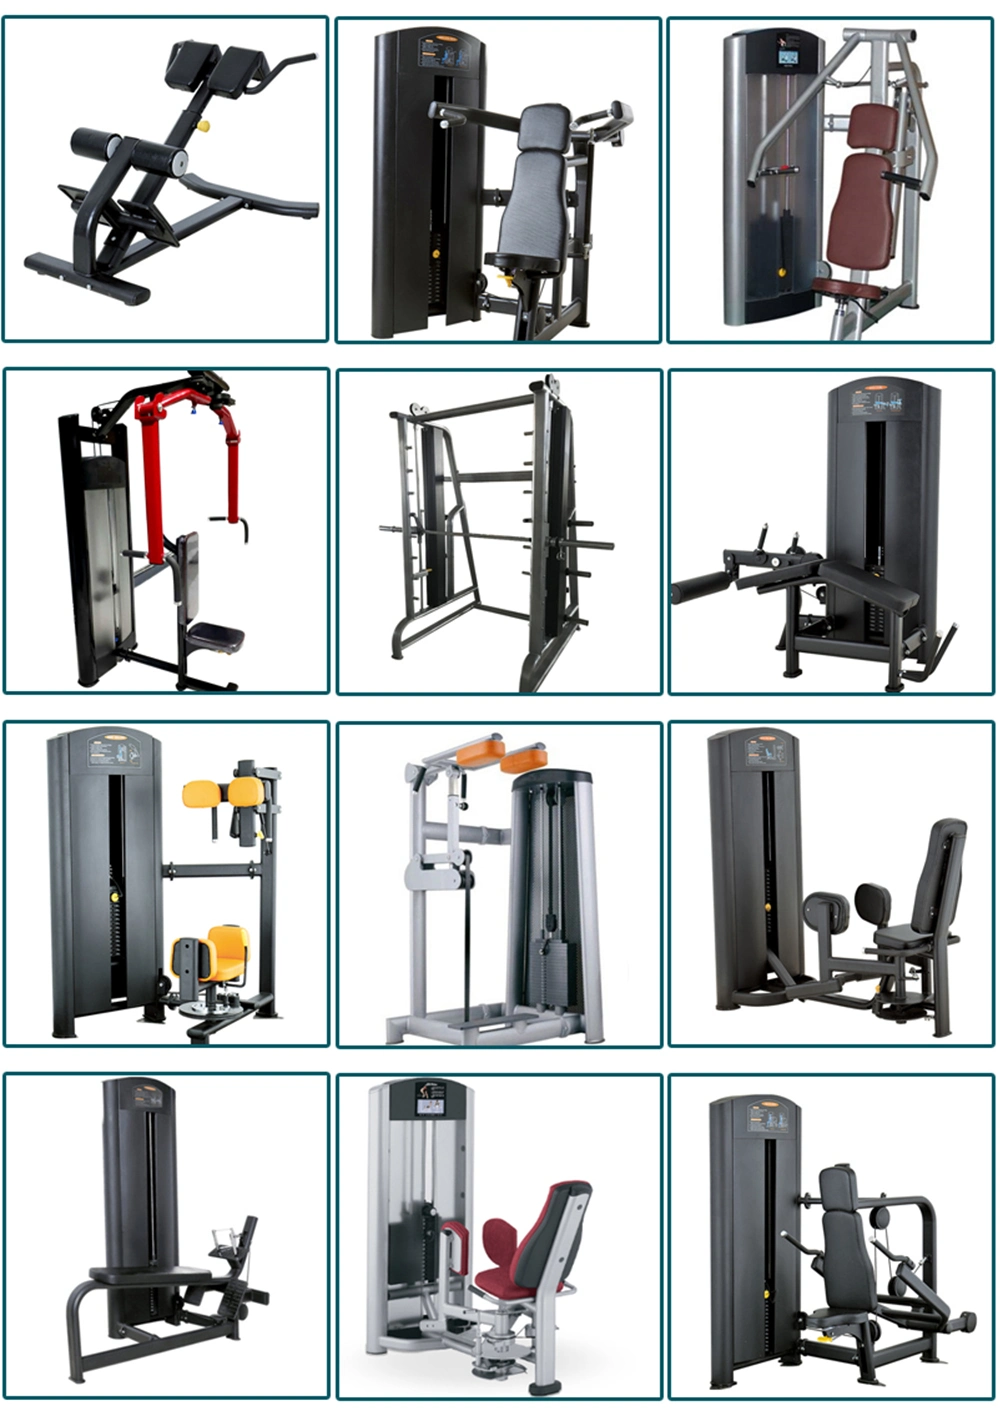 Factory Price Fitness, Gym Equipment, Body Building, Seated Leg Press